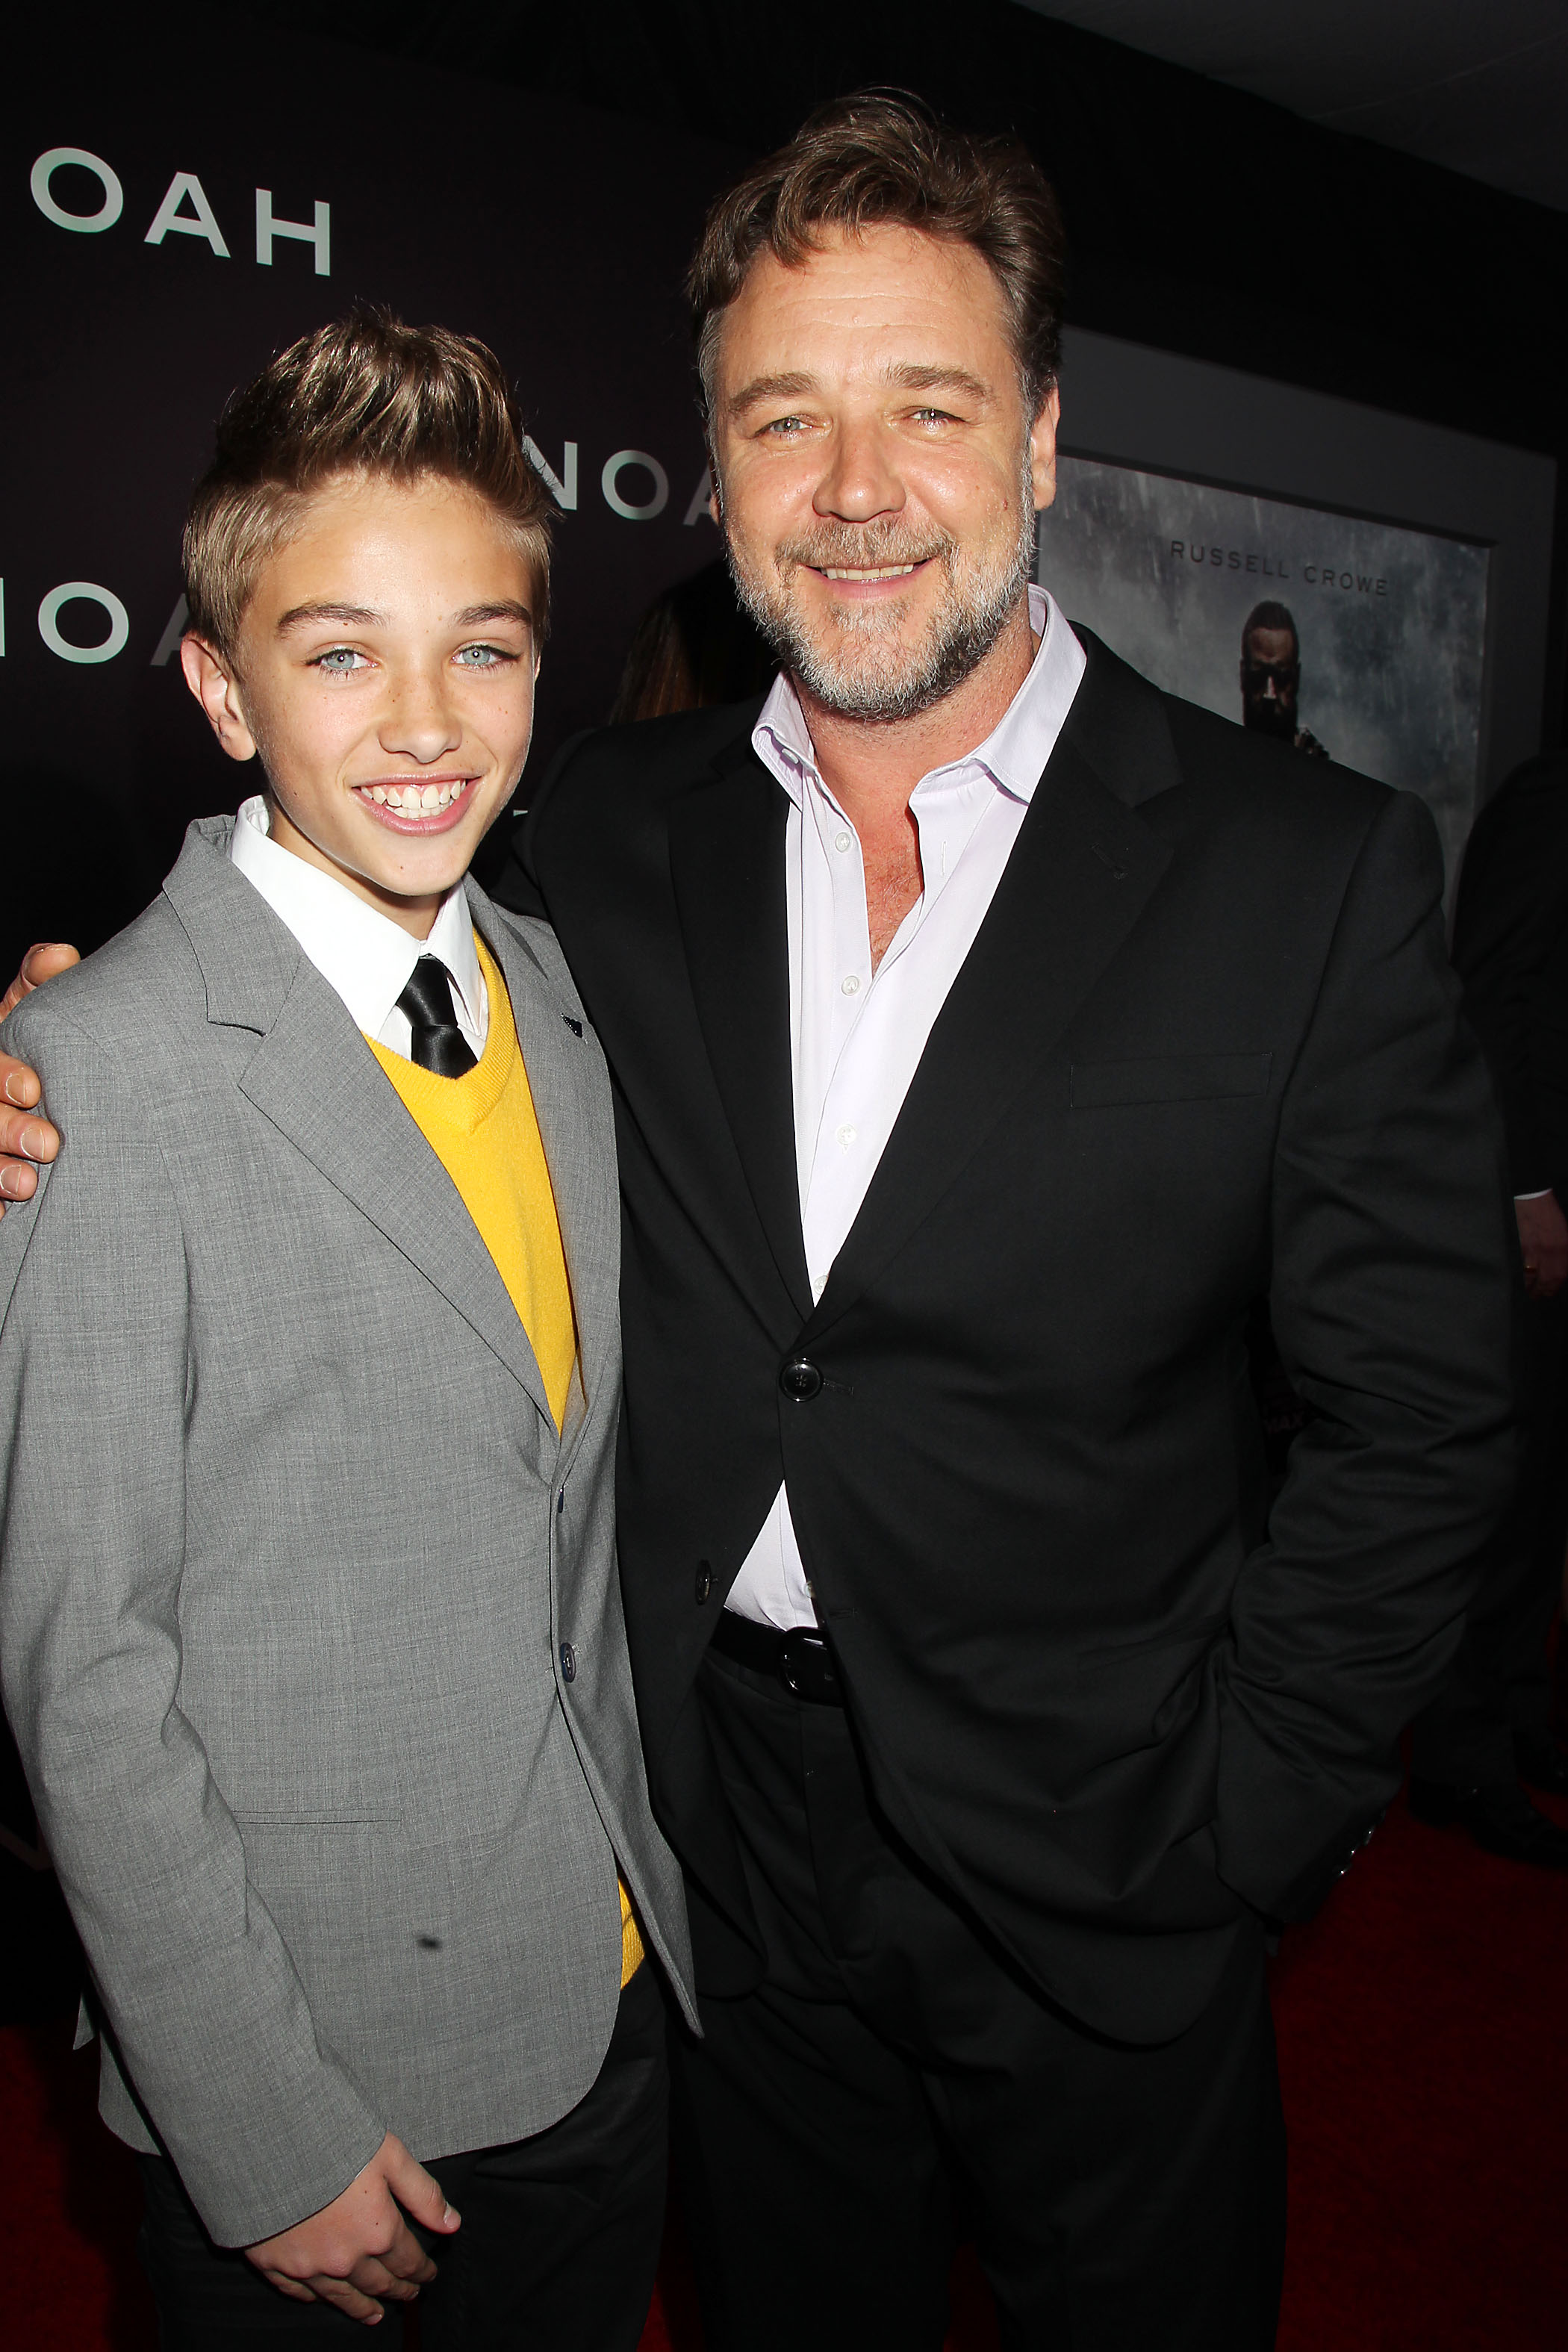 Gavin Casalegno and Russell Crowe at the NOAH Premier in NYC